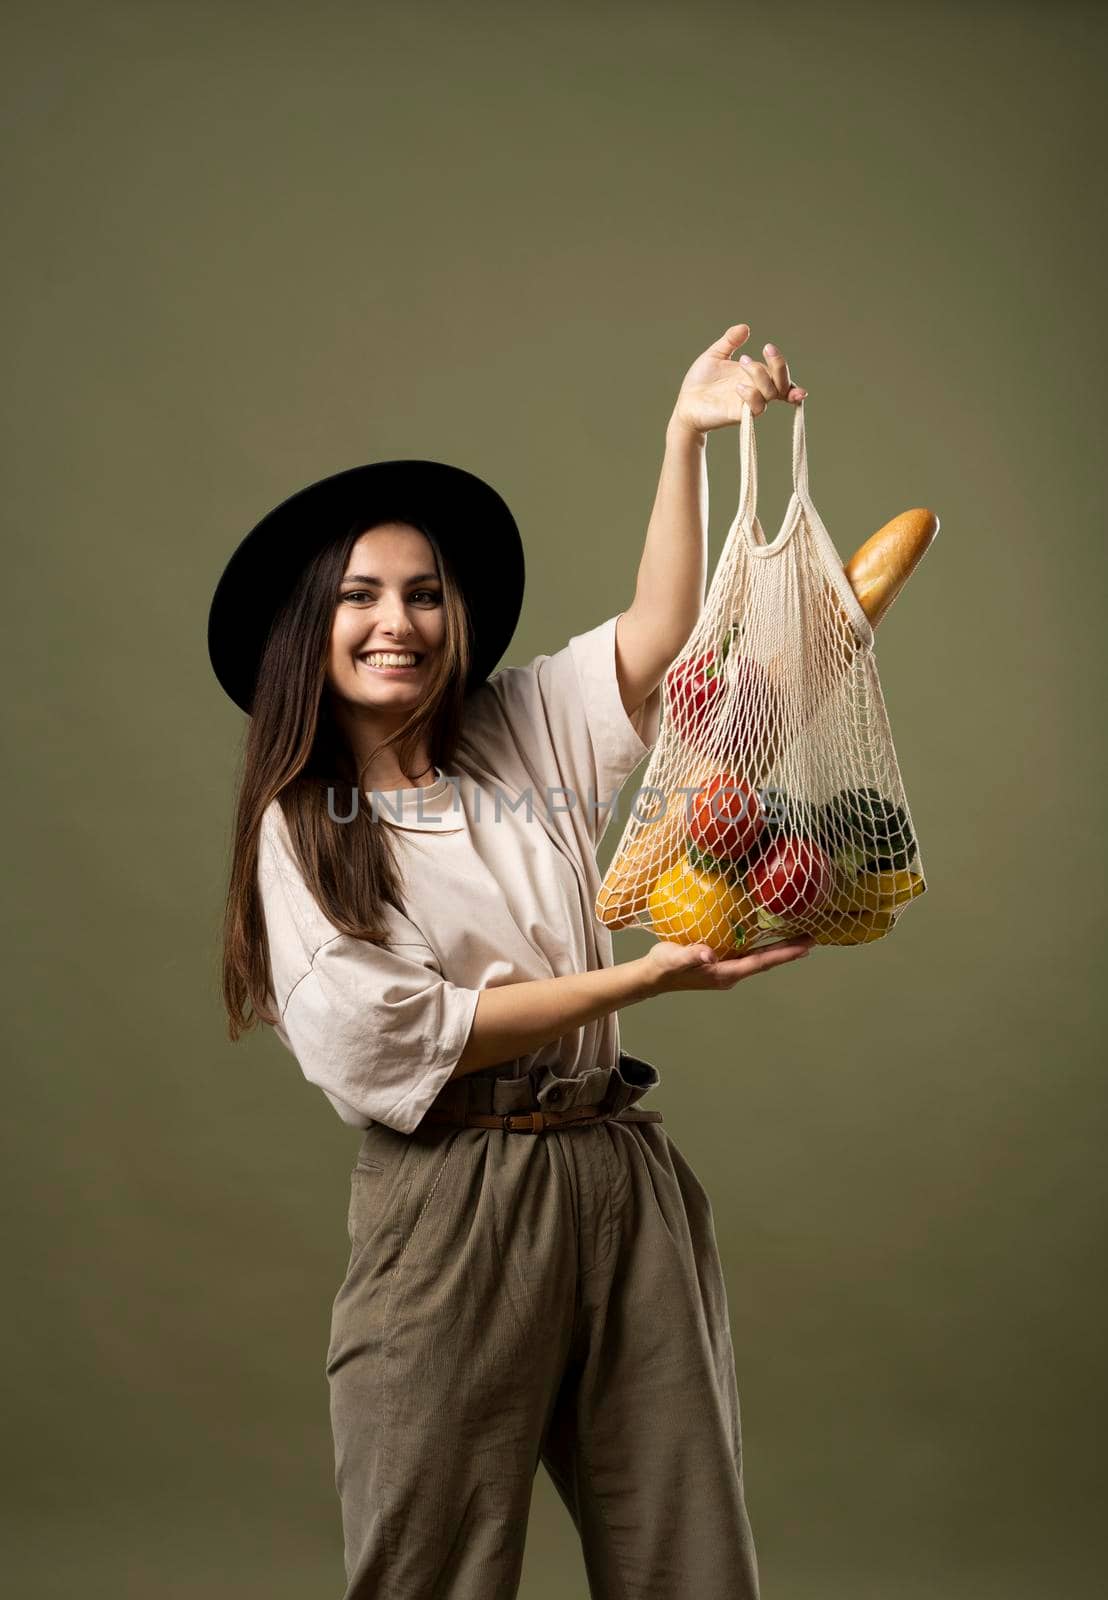 Cheerful brunette woman in beige t-shirt and black hat holding a mesh eco bag full of fruits and vegetables on natural green background in studio. Zero waste concept. by vovsht